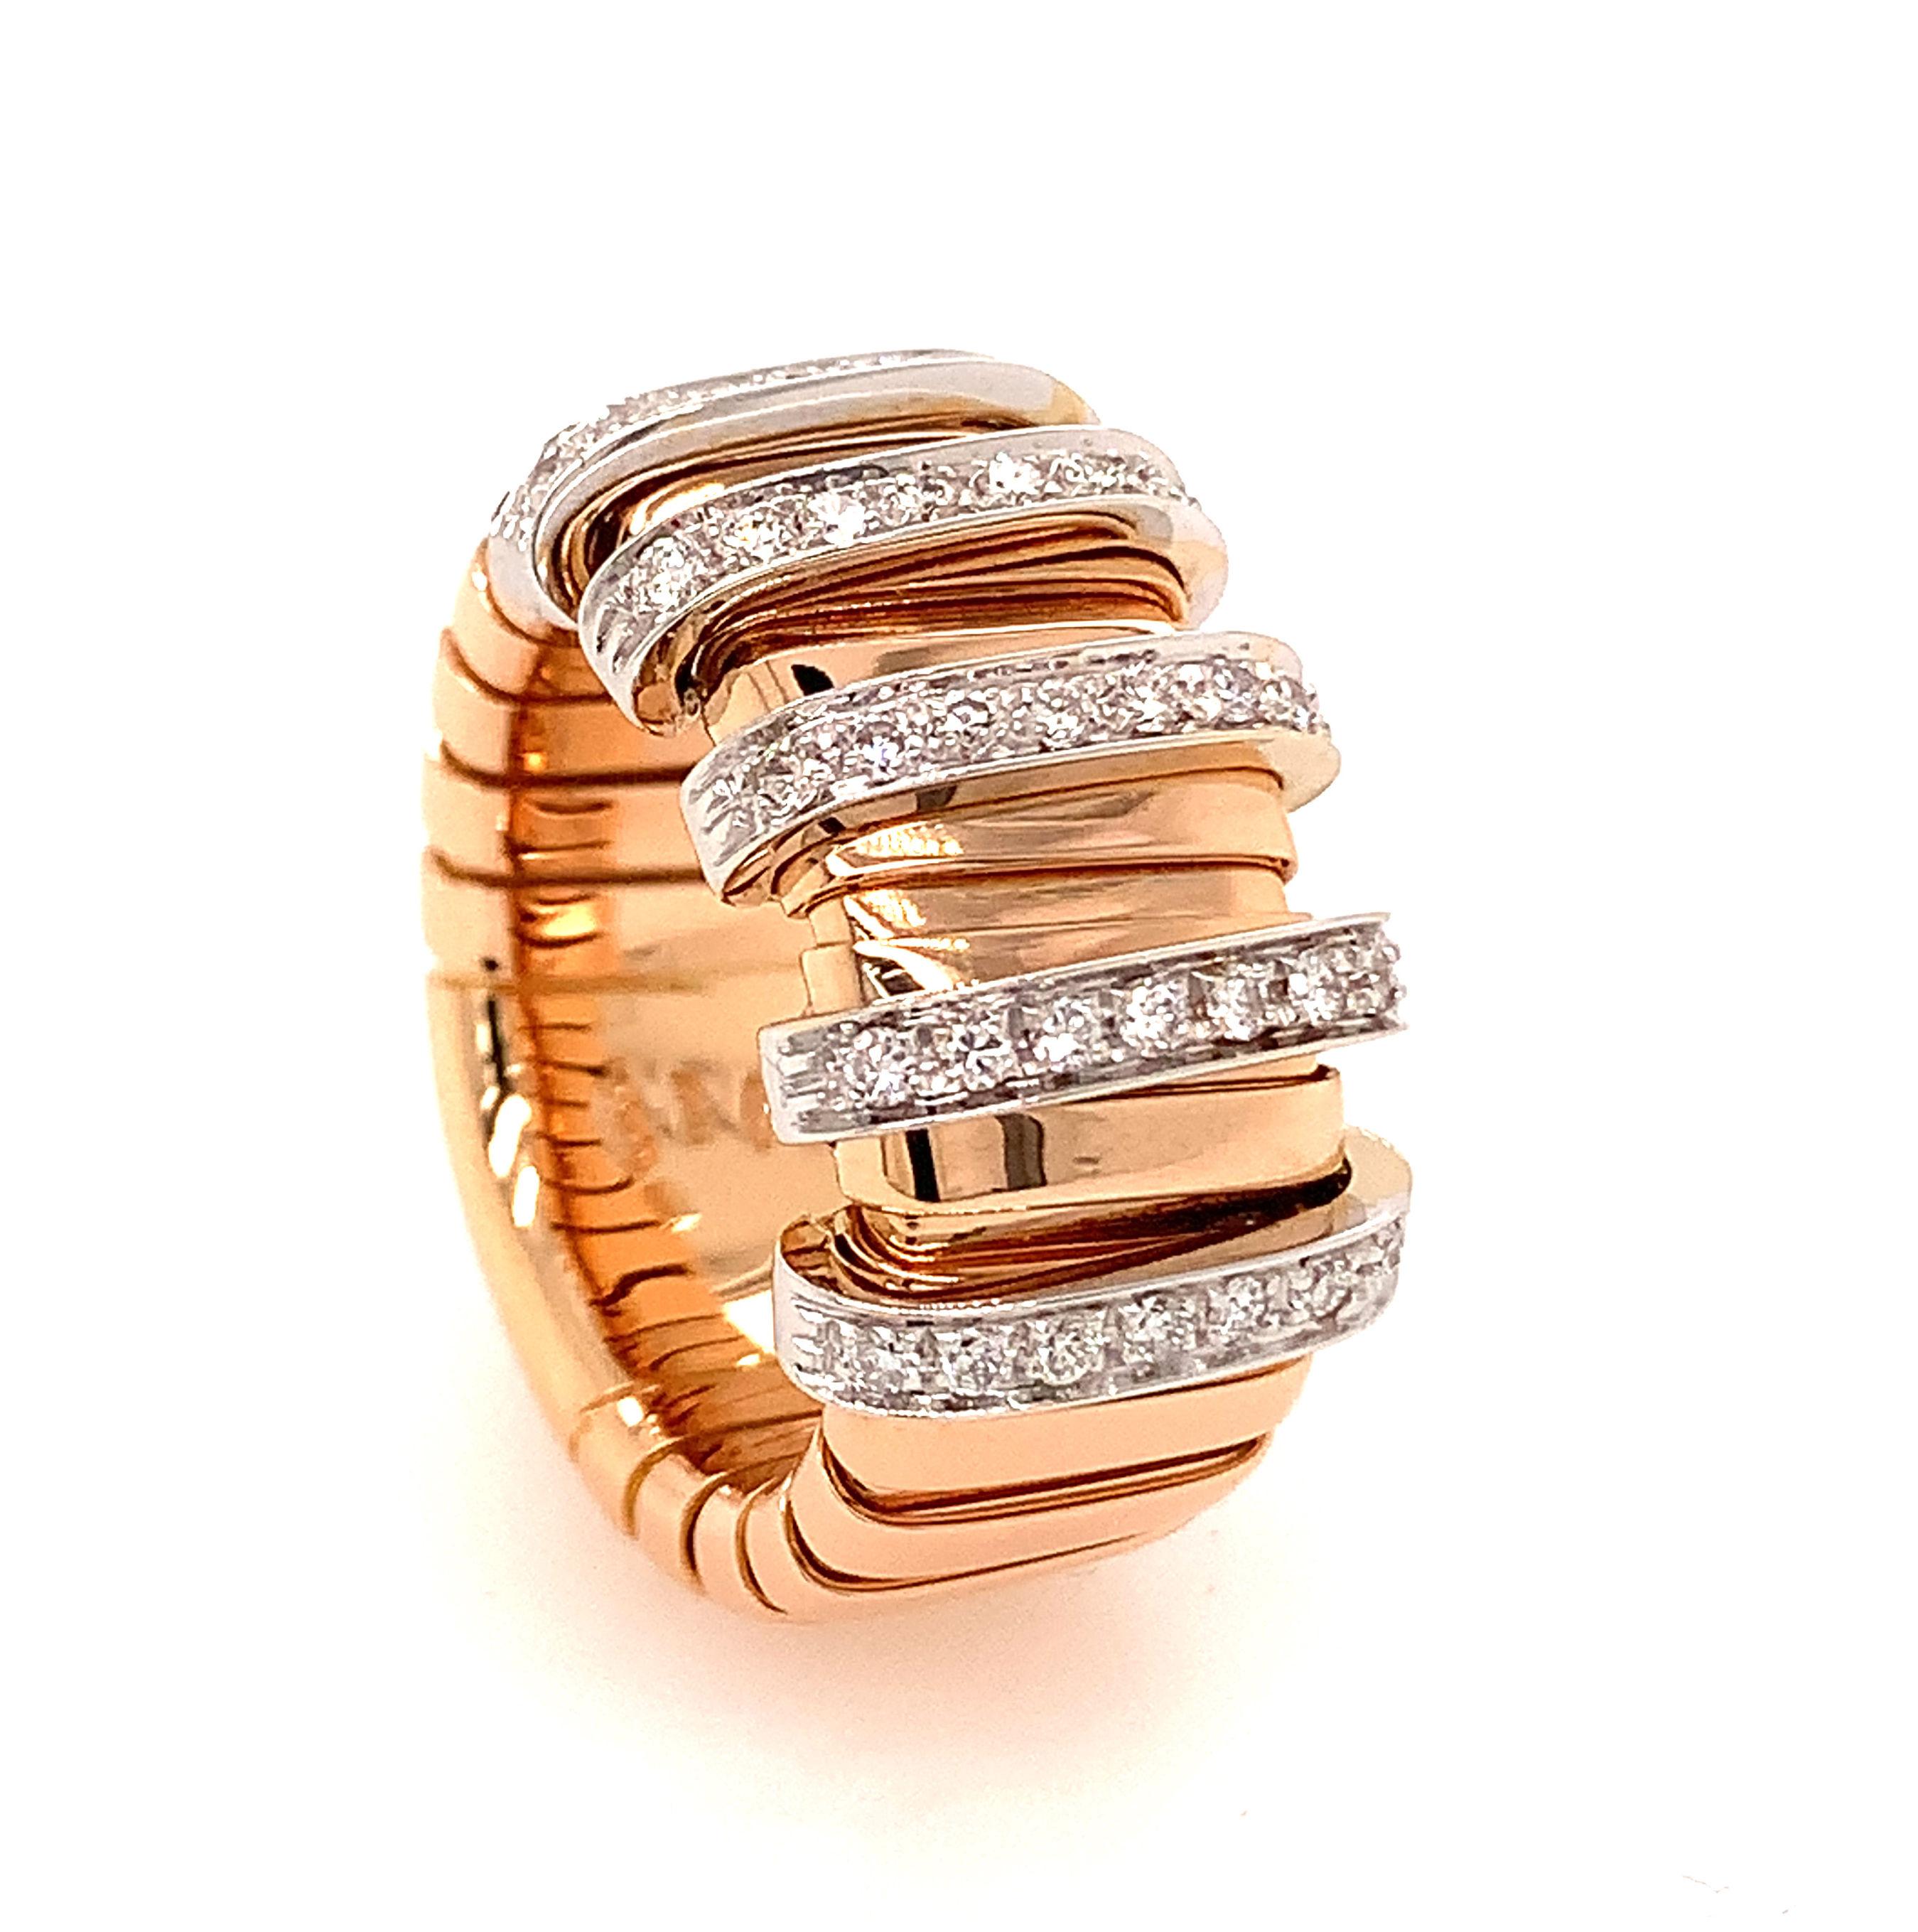 Contemporary 18kt Rose Gold Tubo Gas Flat Ring with Diamond Stations